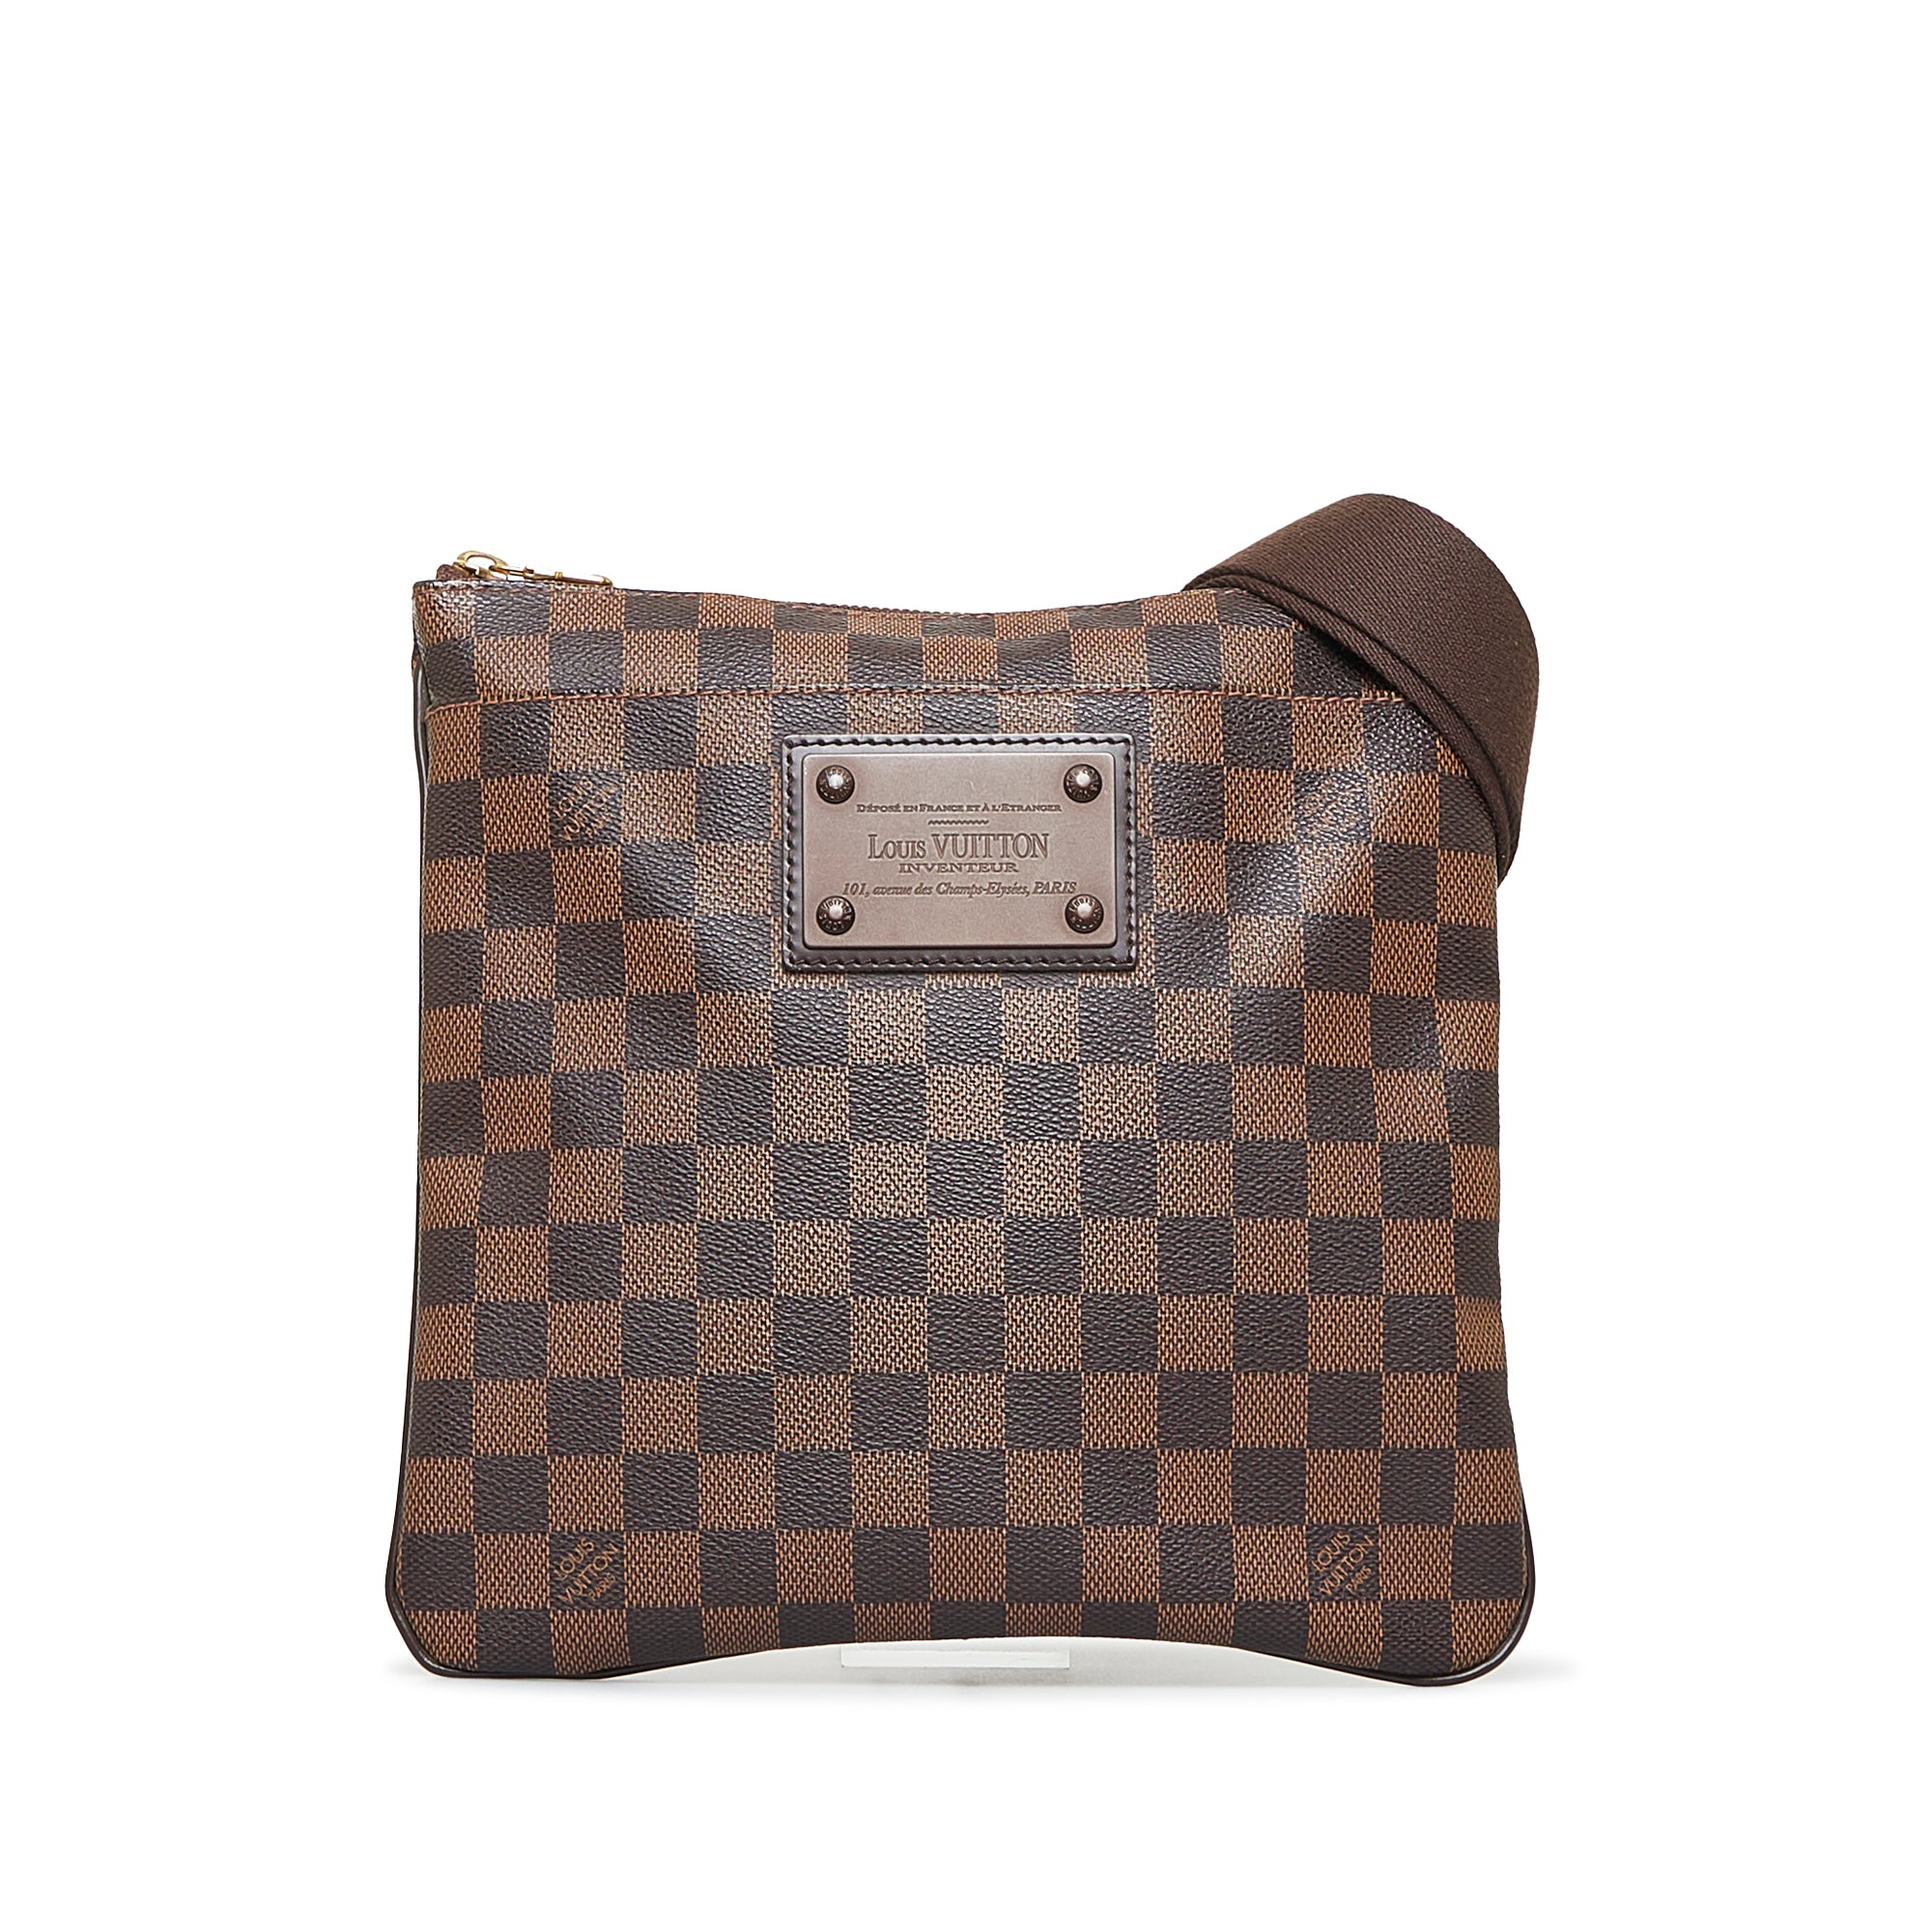 LOUIS VUITTON 101: GUIDE TO LEATHERS & MORE